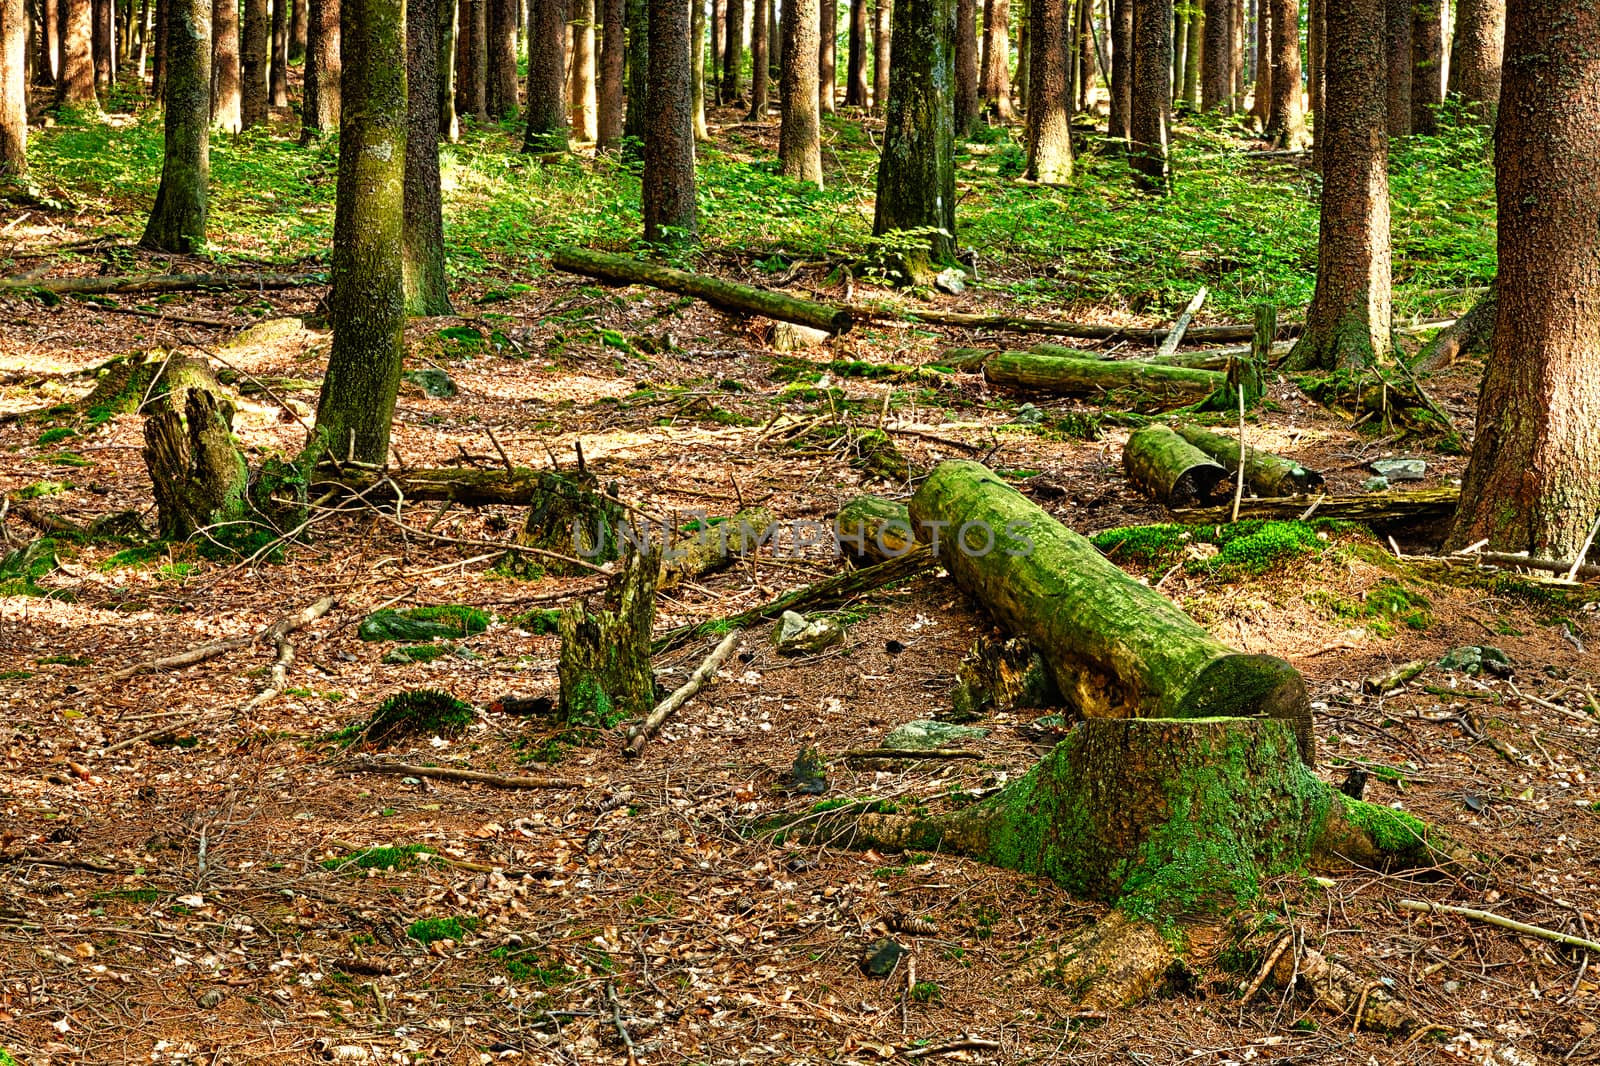 The primeval forest with mossed ground